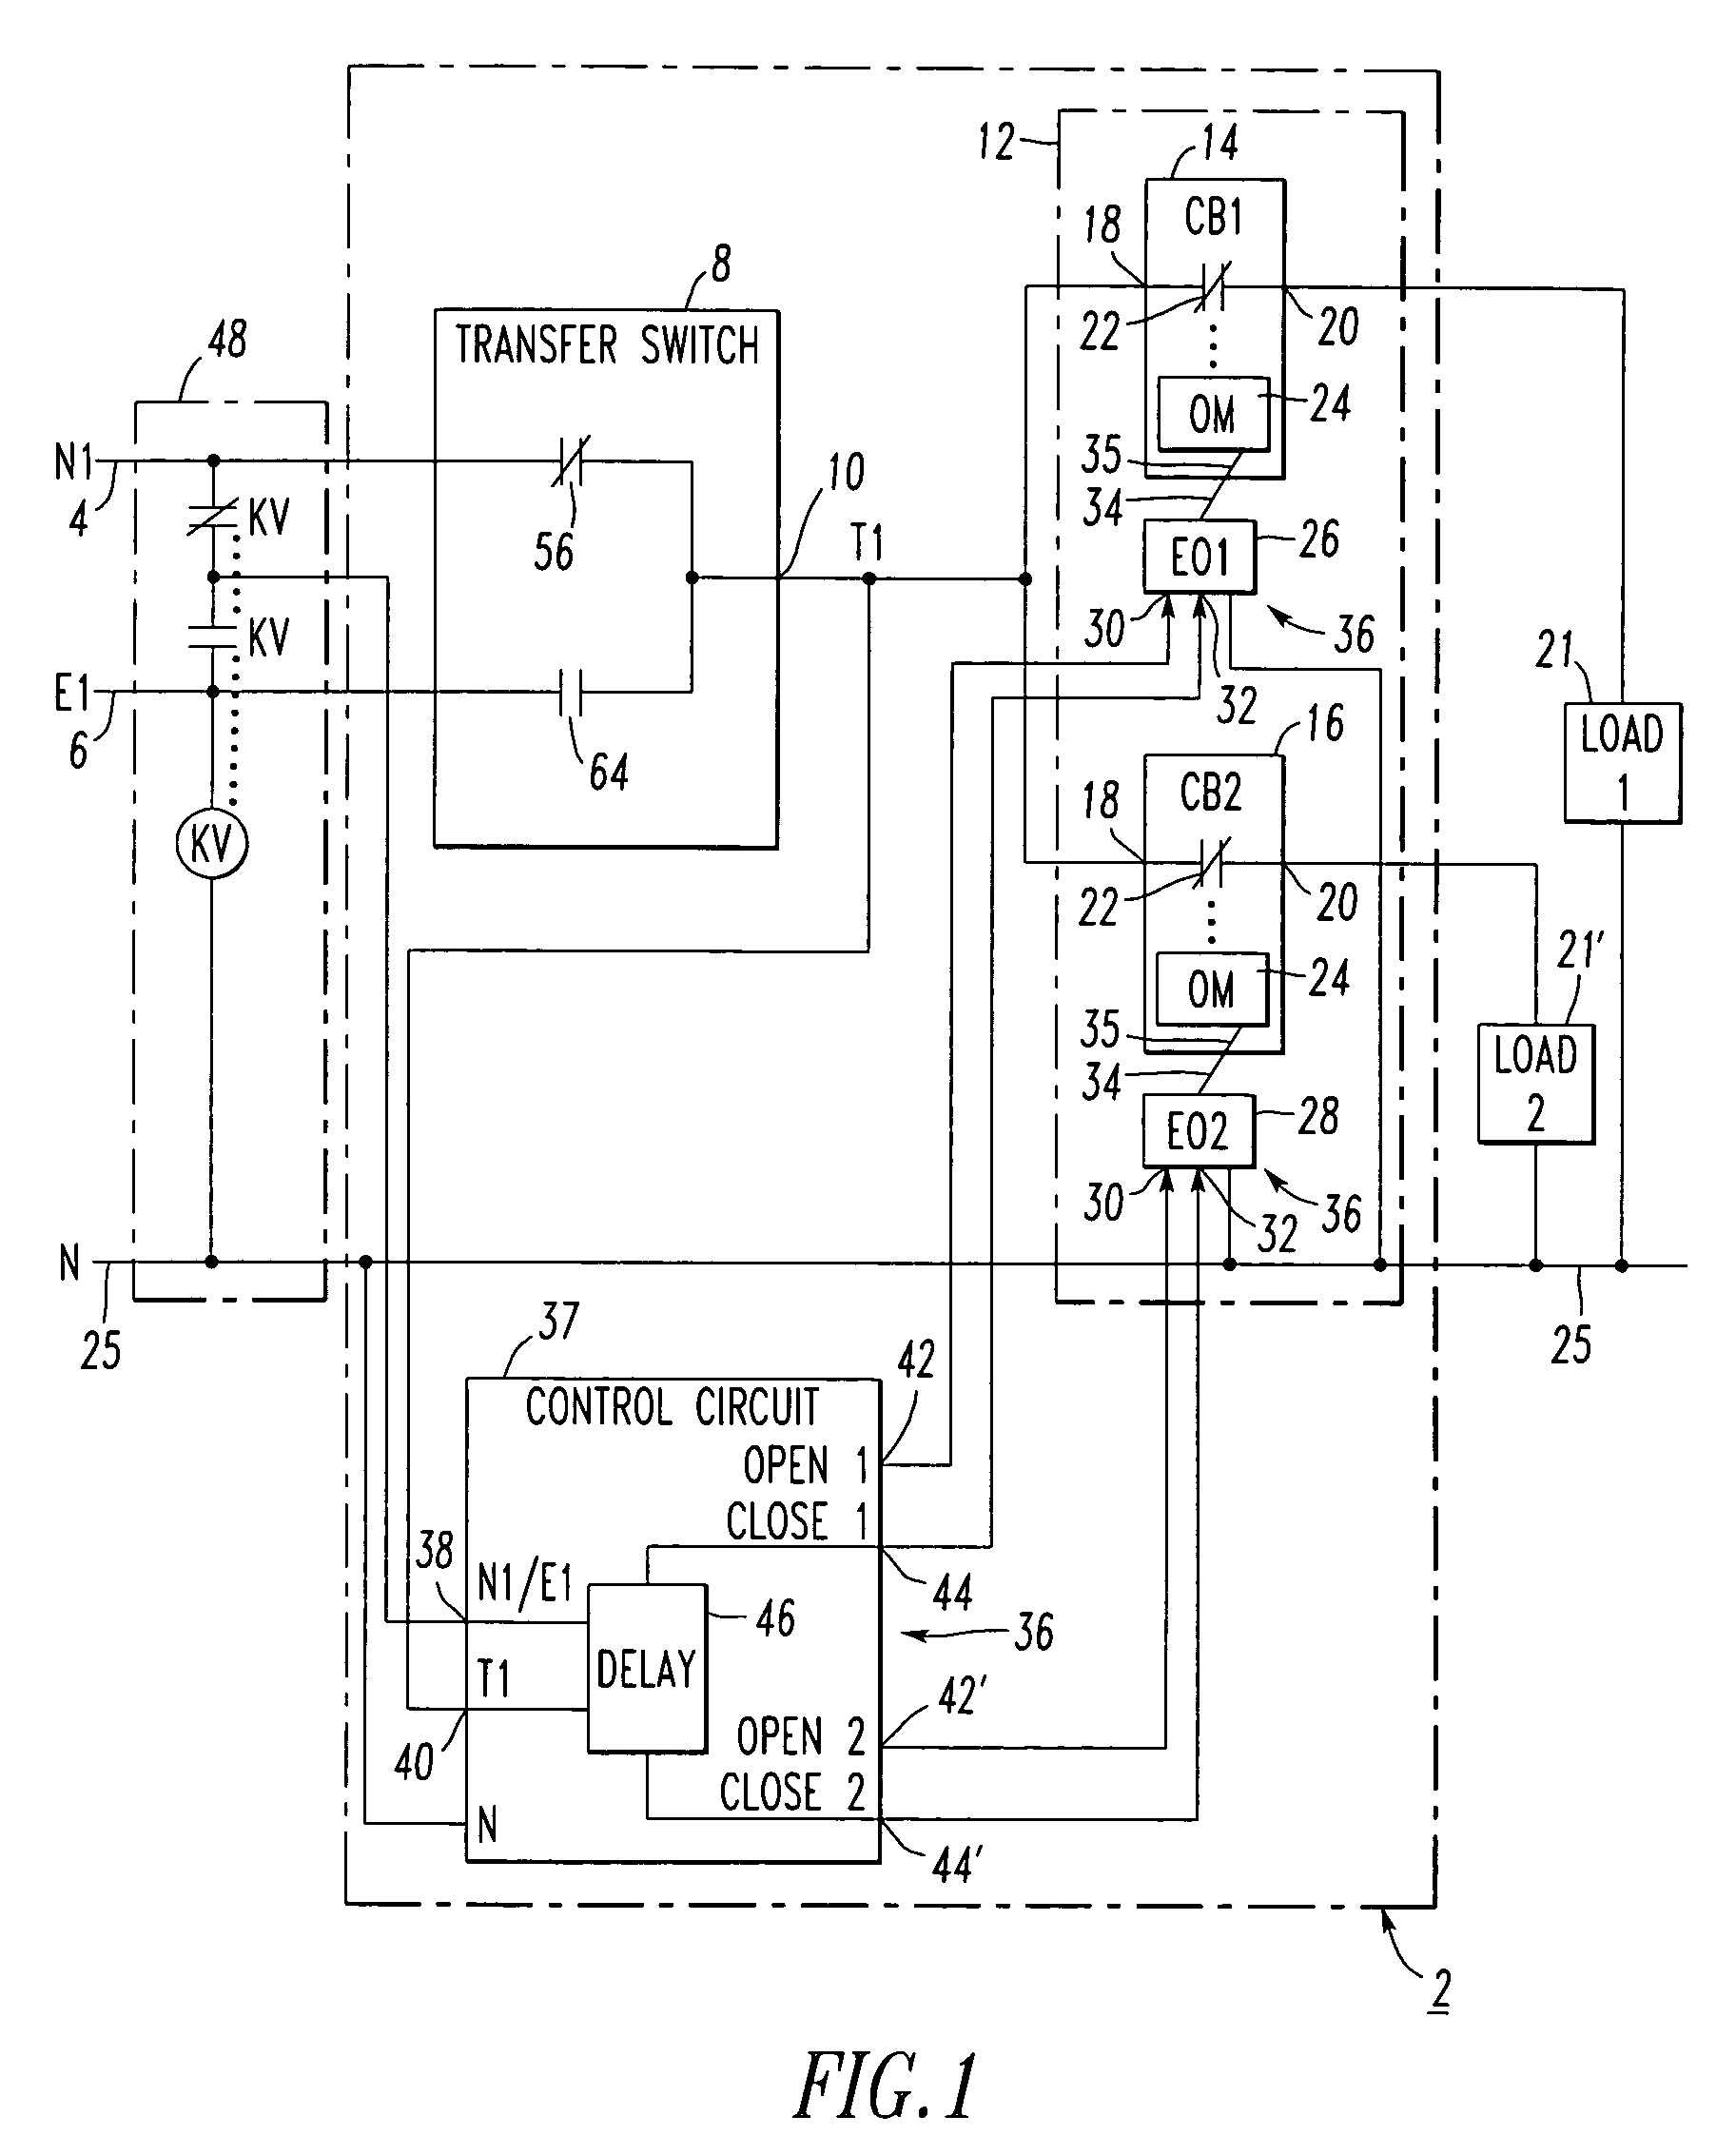 Power distribution system and control system for same